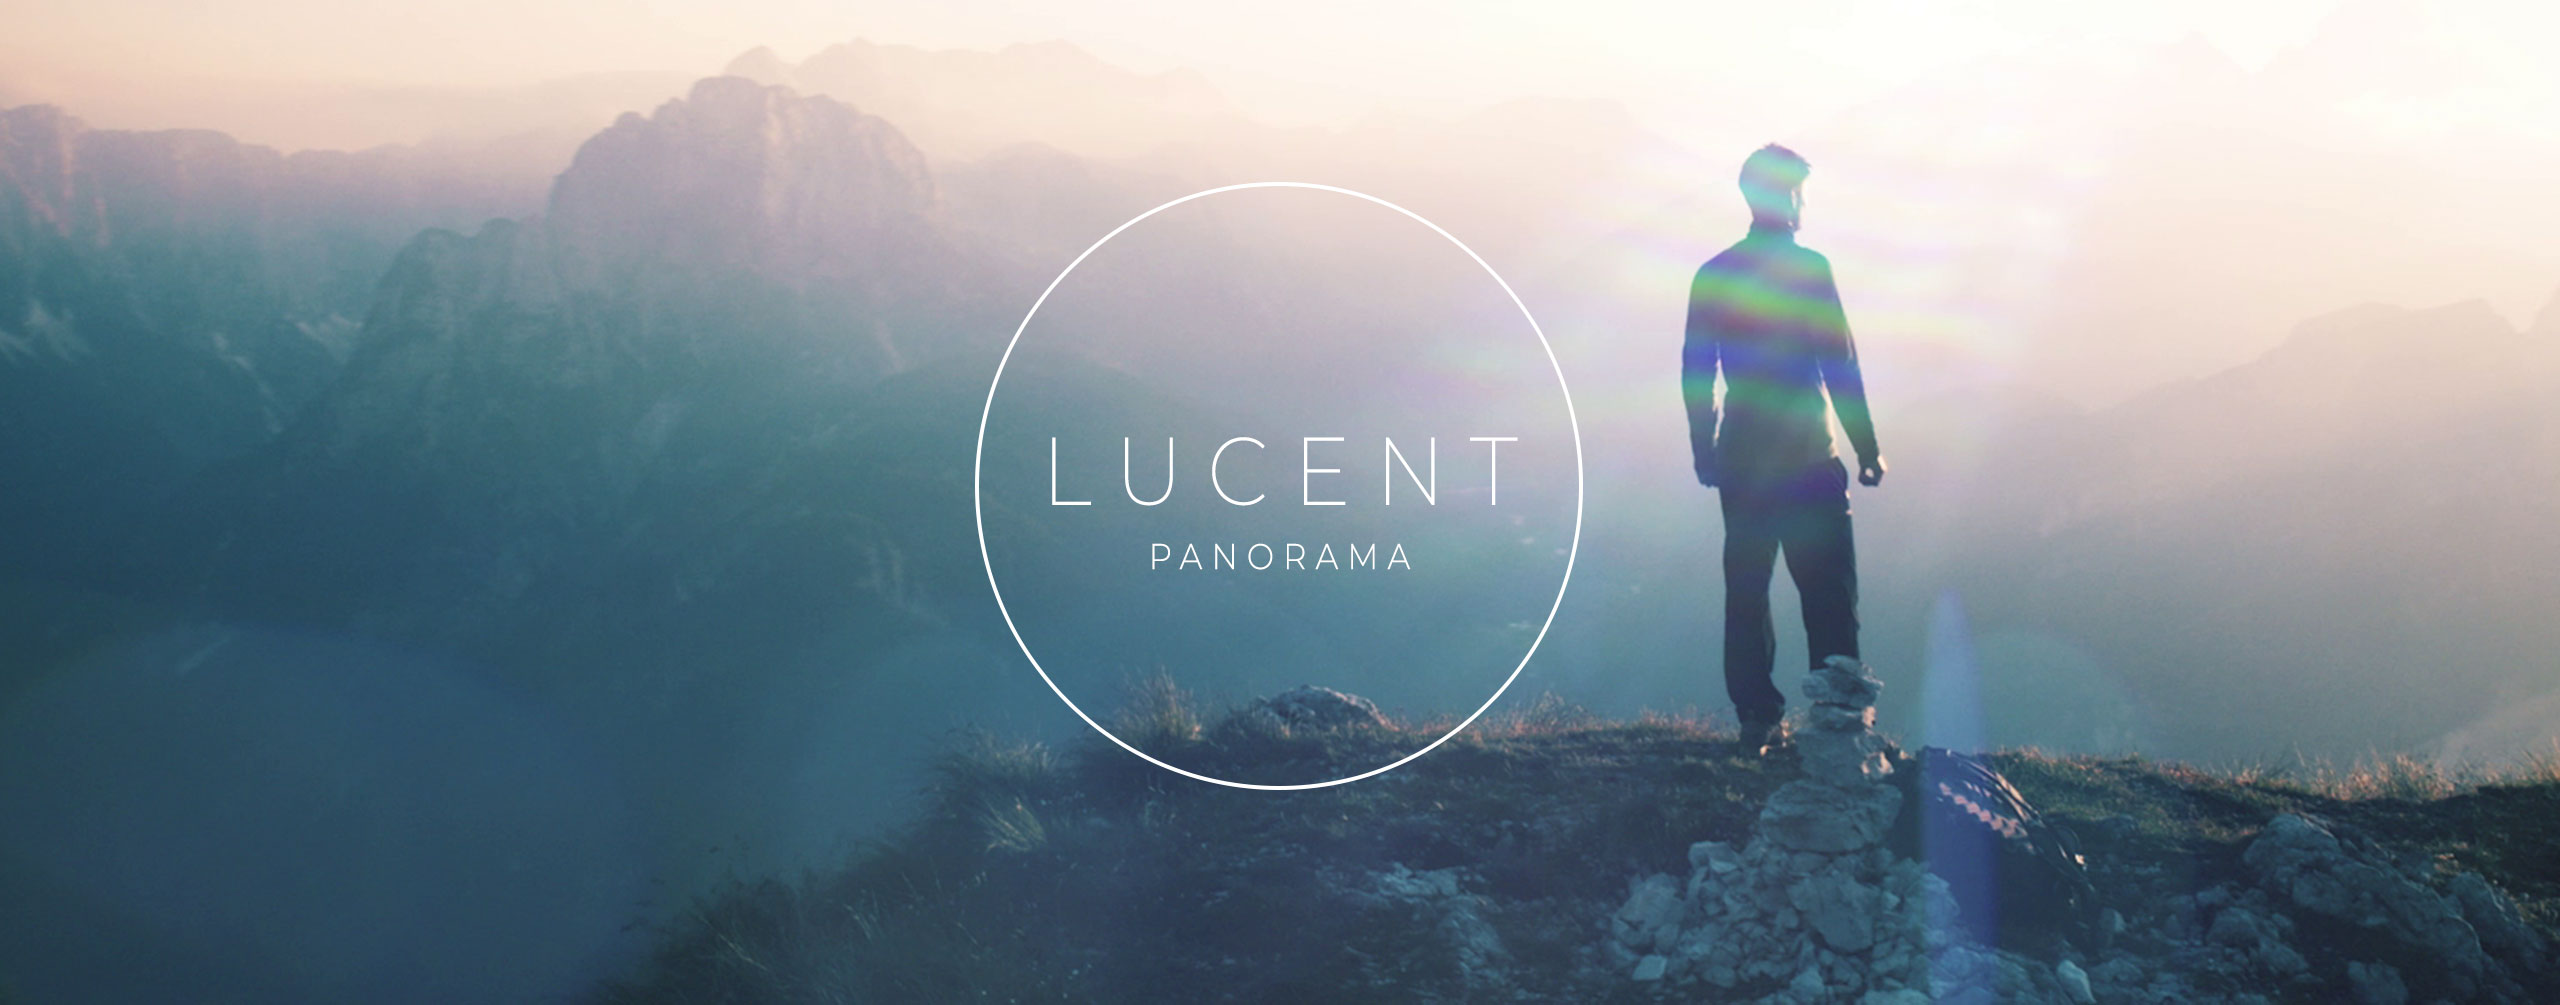 Lucent Panorama - Cold-hued Lens Flares